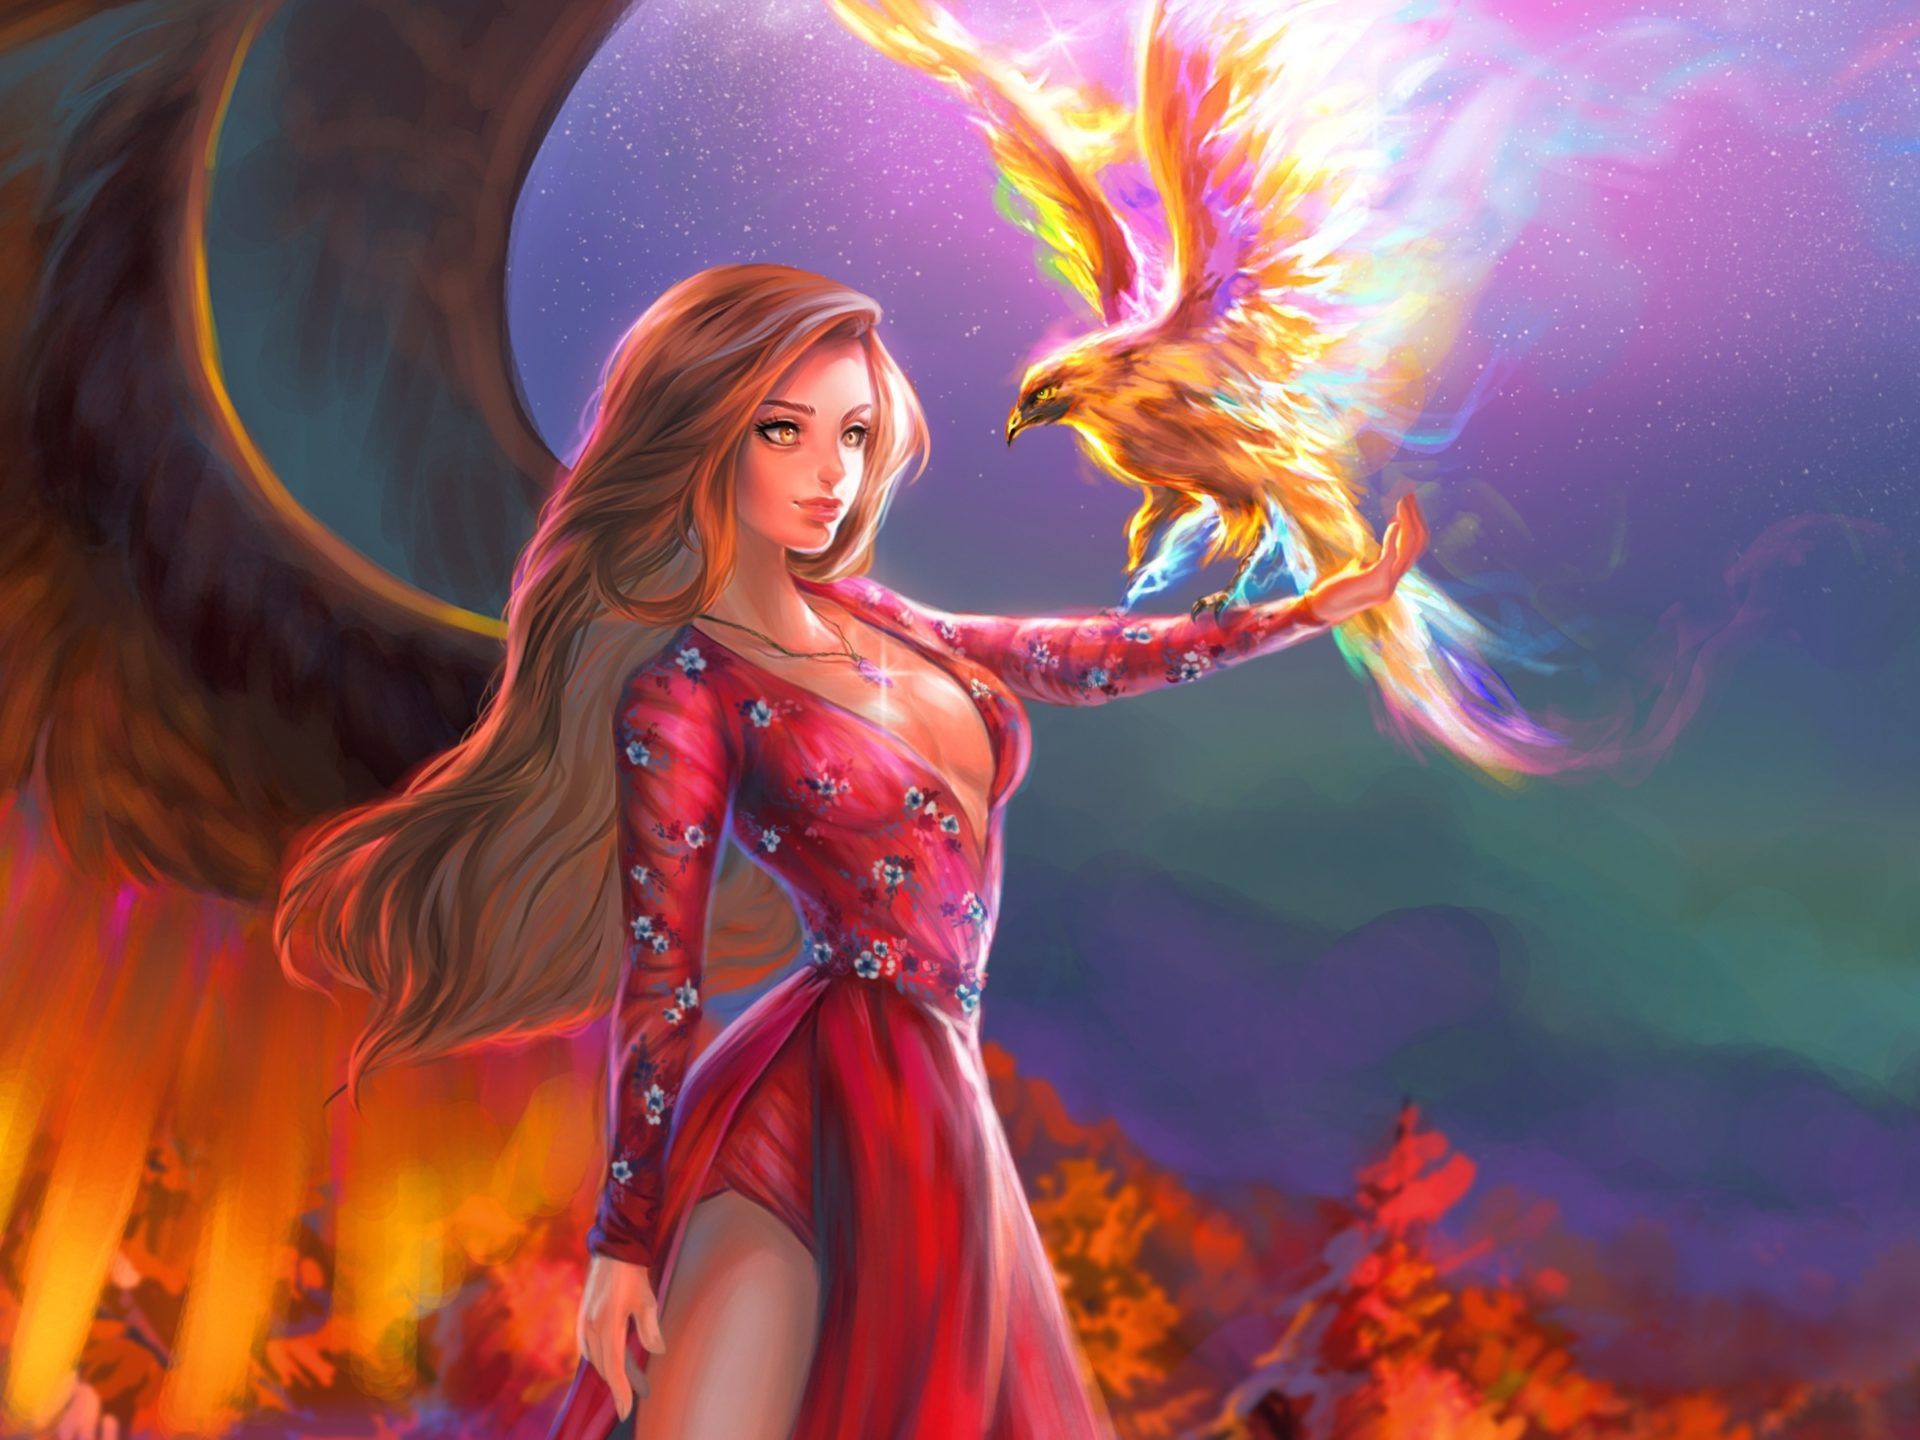 Mythology fantasy girl with a phoenix bird which is cyclically regenerating or being born again HD Wallpaper for Desktop, Wallpaper13.com